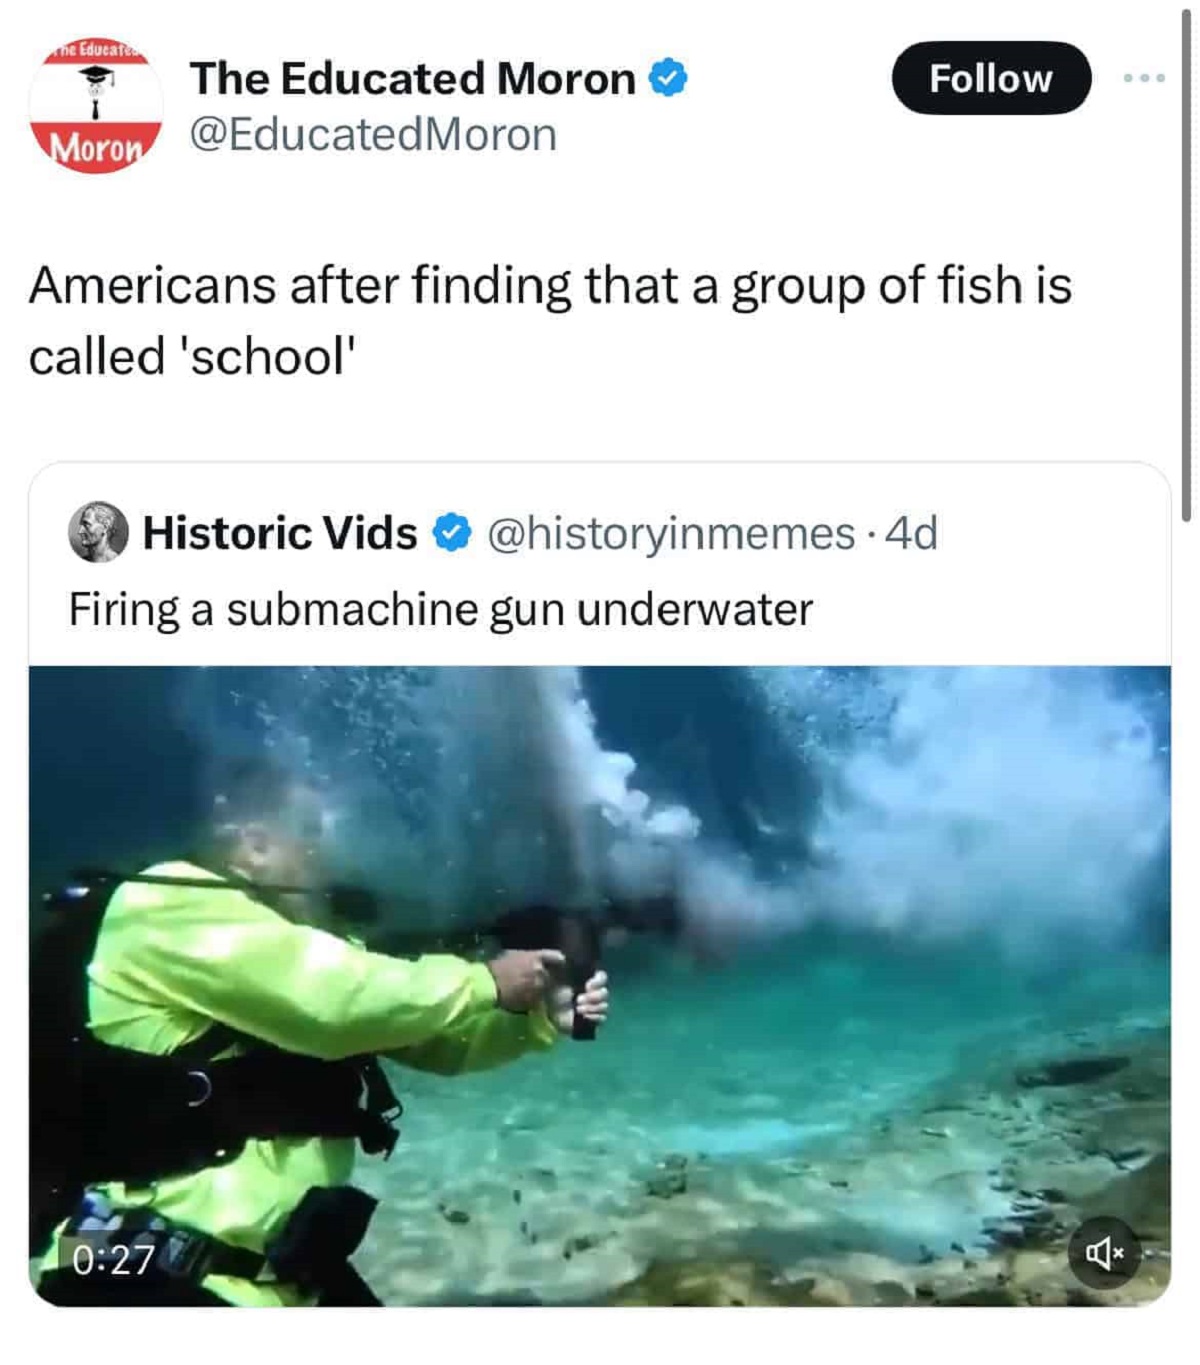 screenshot - The Educate Moron The Educated Moron Americans after finding that a group of fish is called 'school' Historic Vids Firing a submachine gun underwater